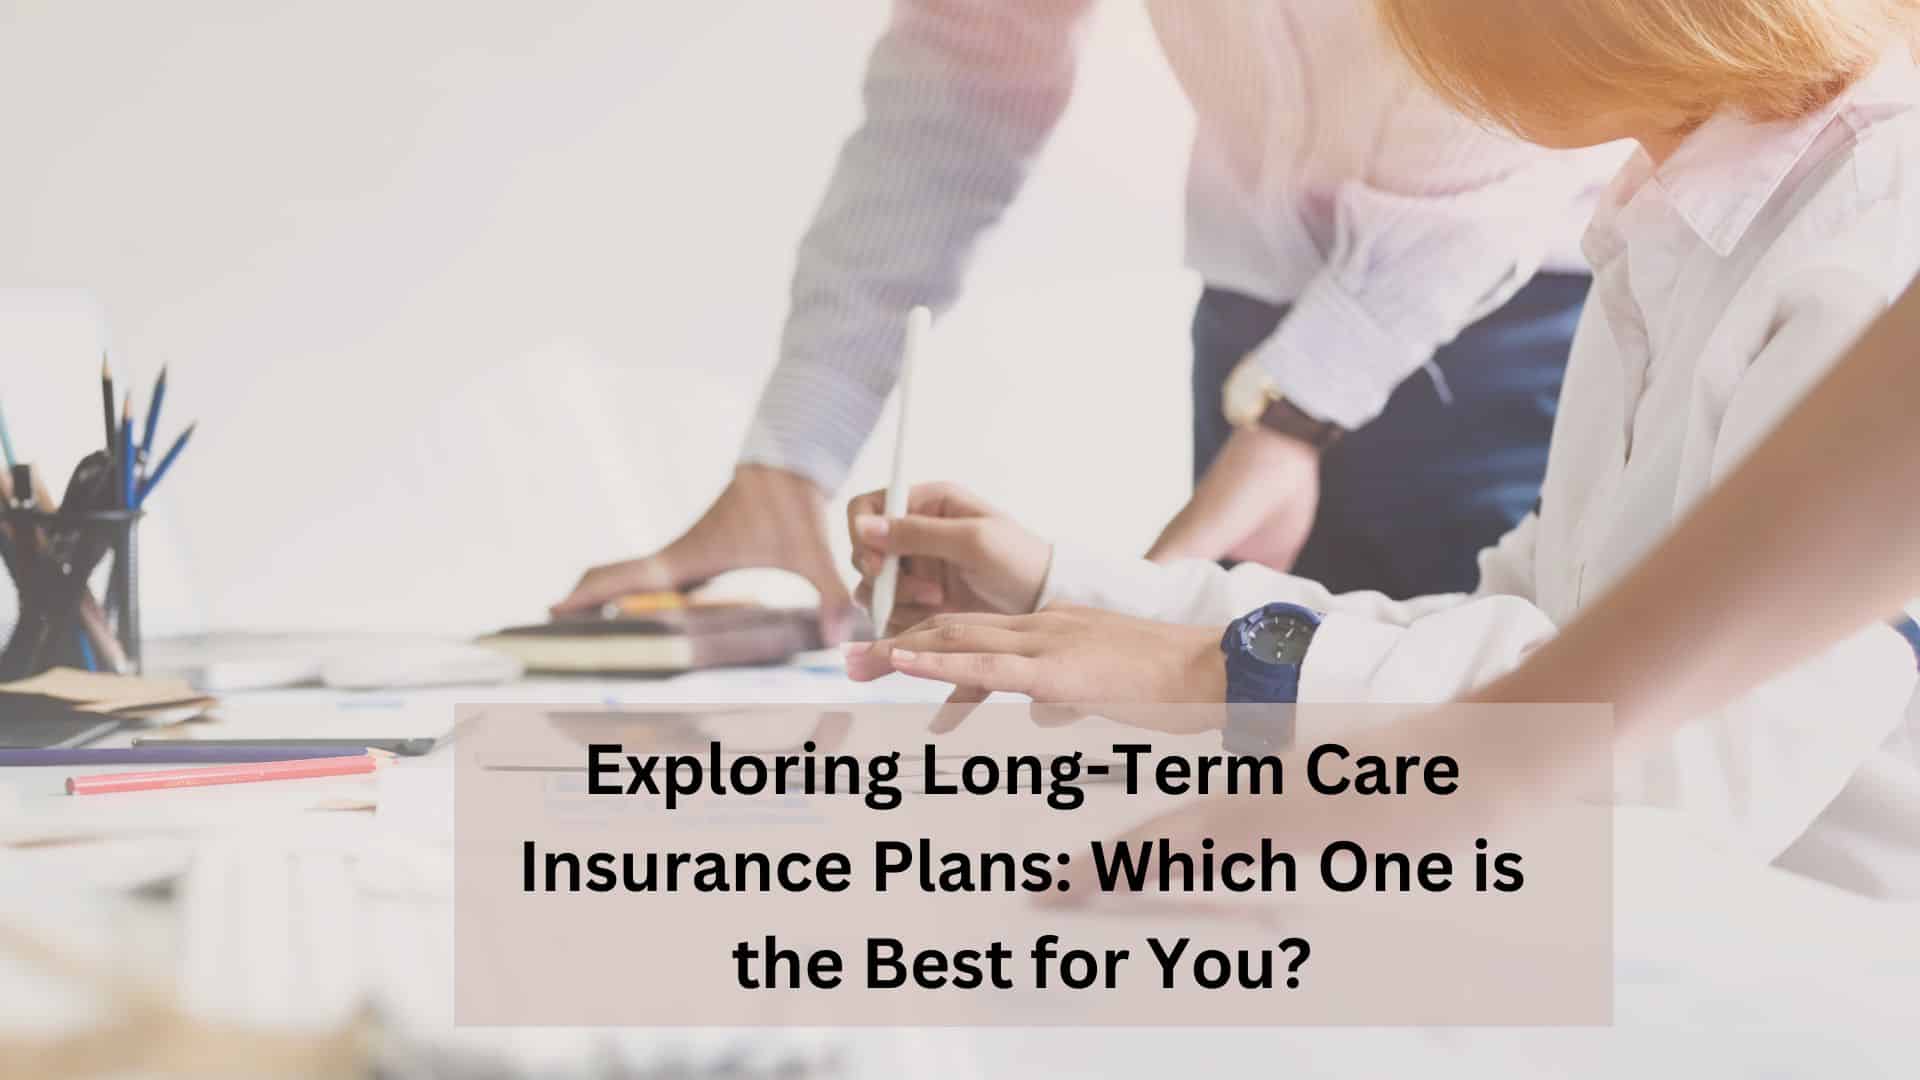 You are currently viewing Exploring Long-Term Care Insurance Plans: Which One is the Best for You?